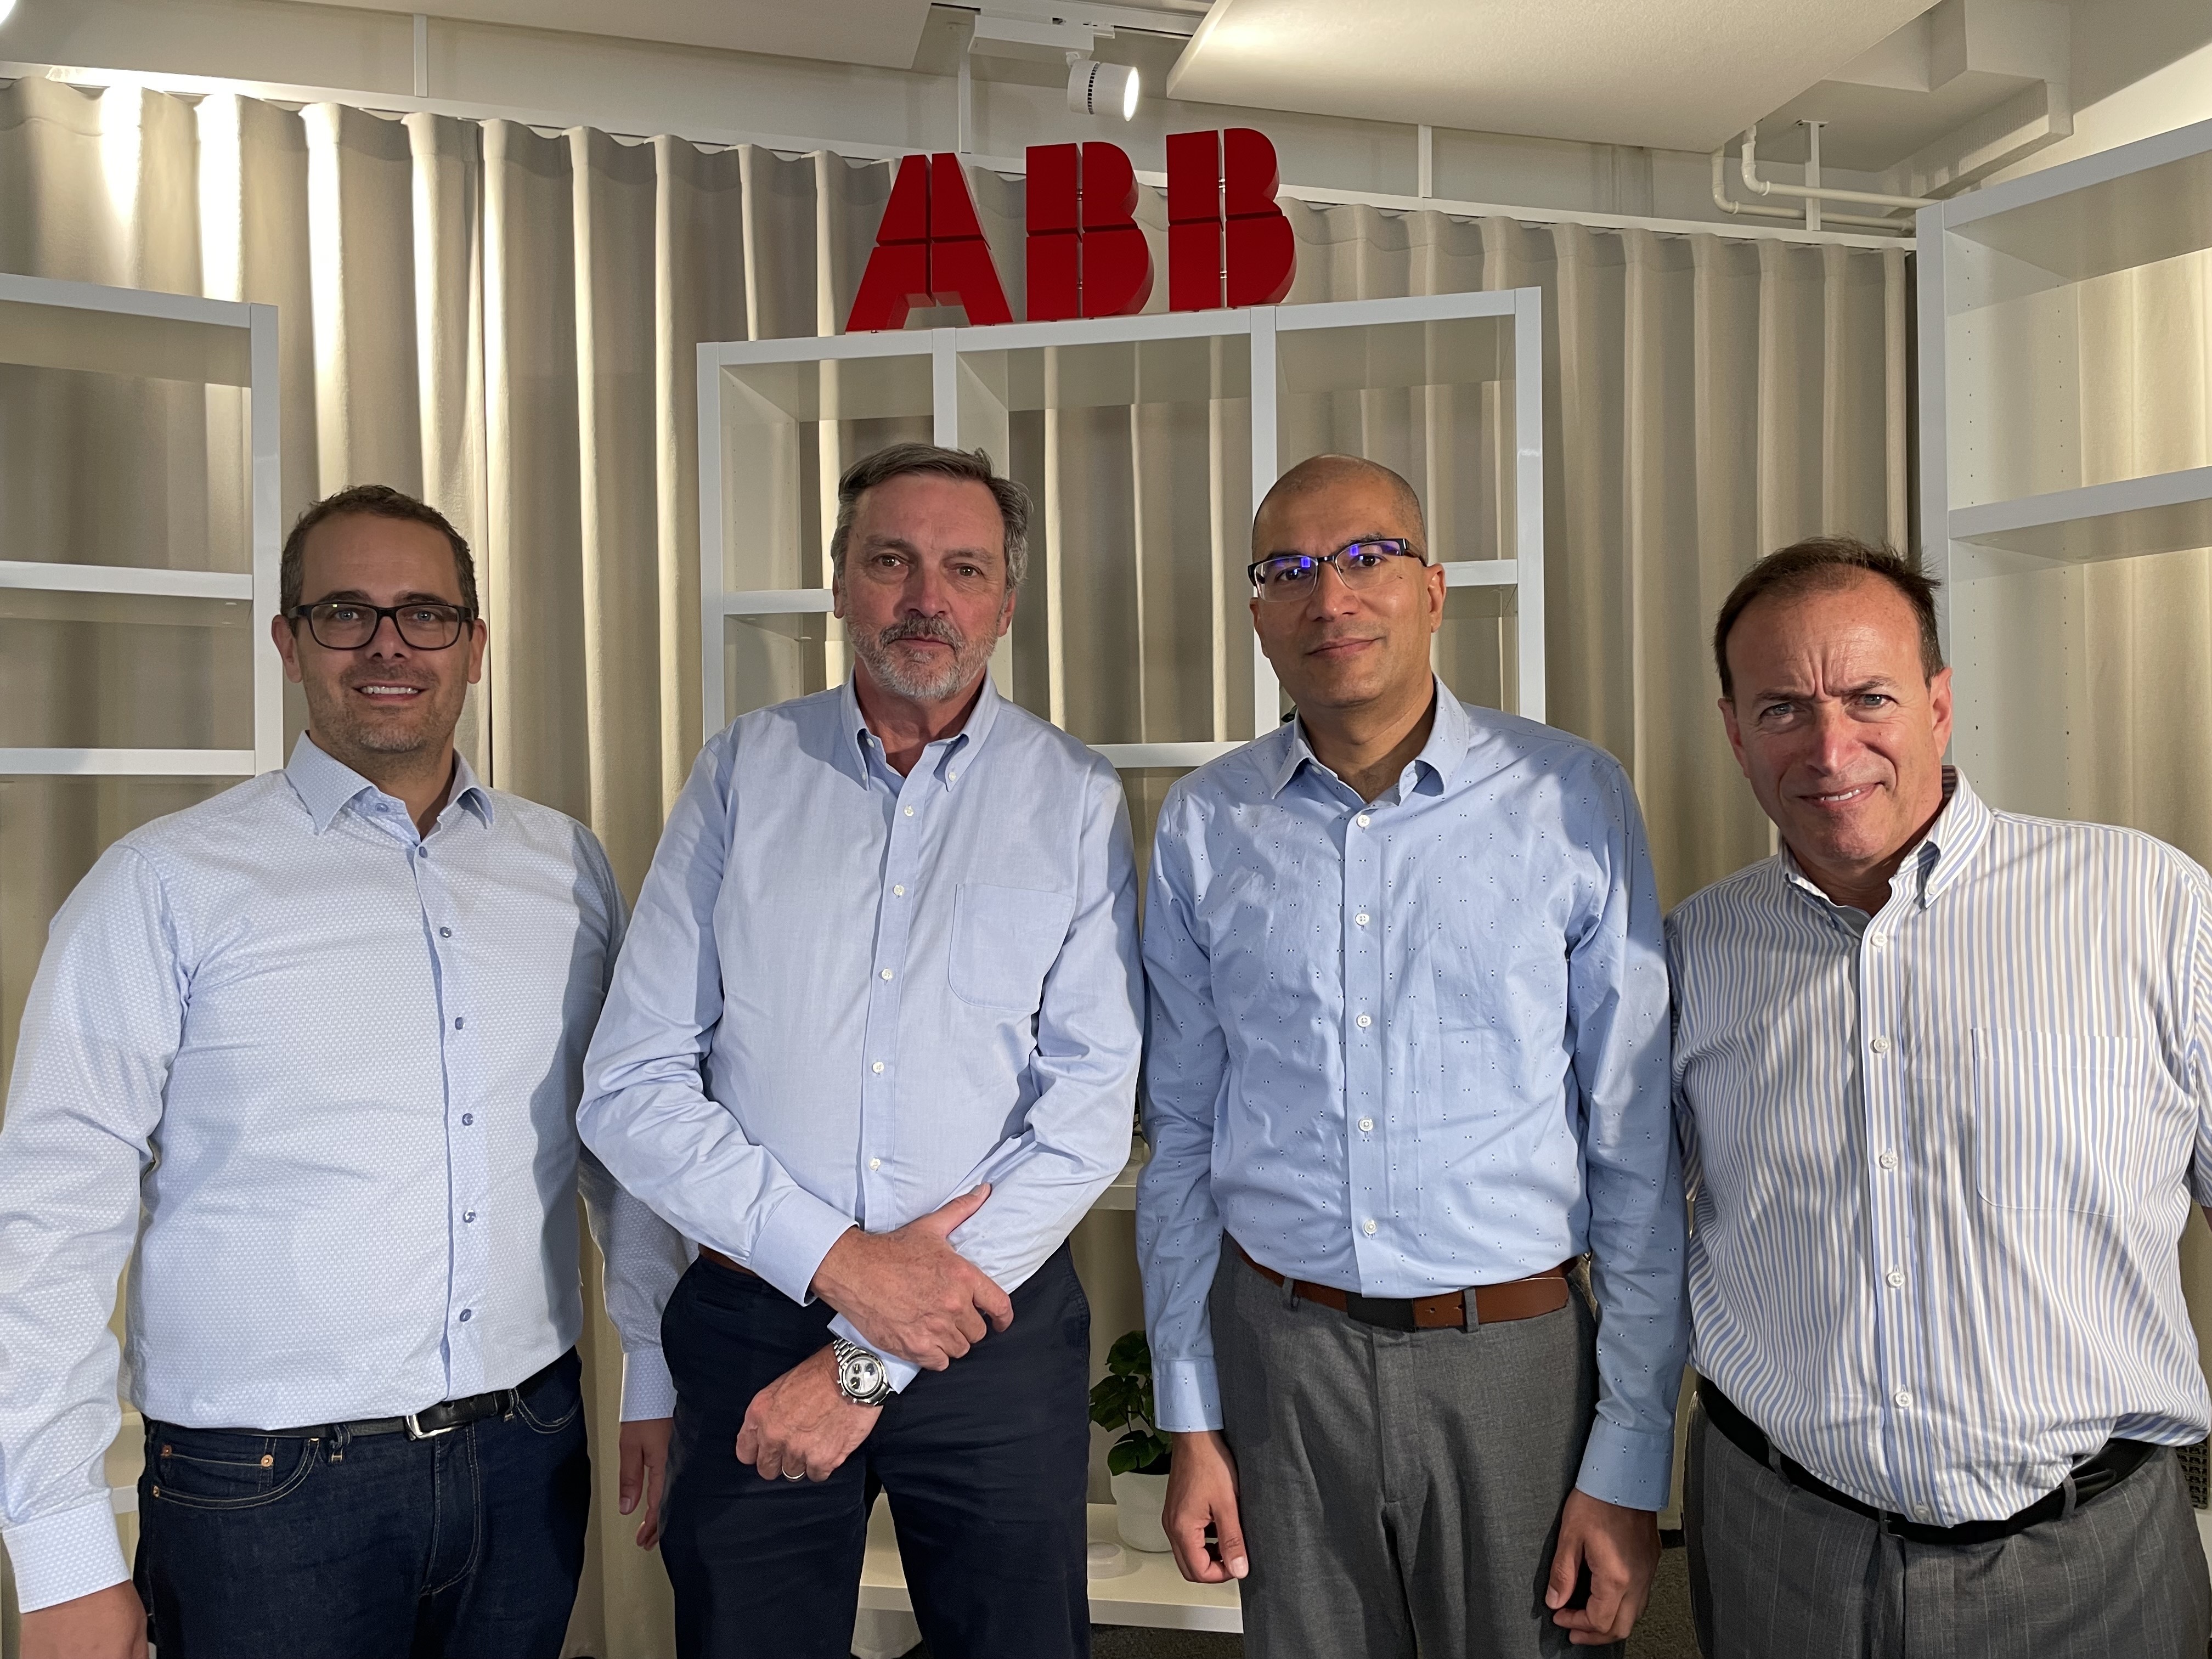 ABB Invests in Strategic Partnership with Clean Energy Start-up to Offer End-to-End Wind Energy Portfolio